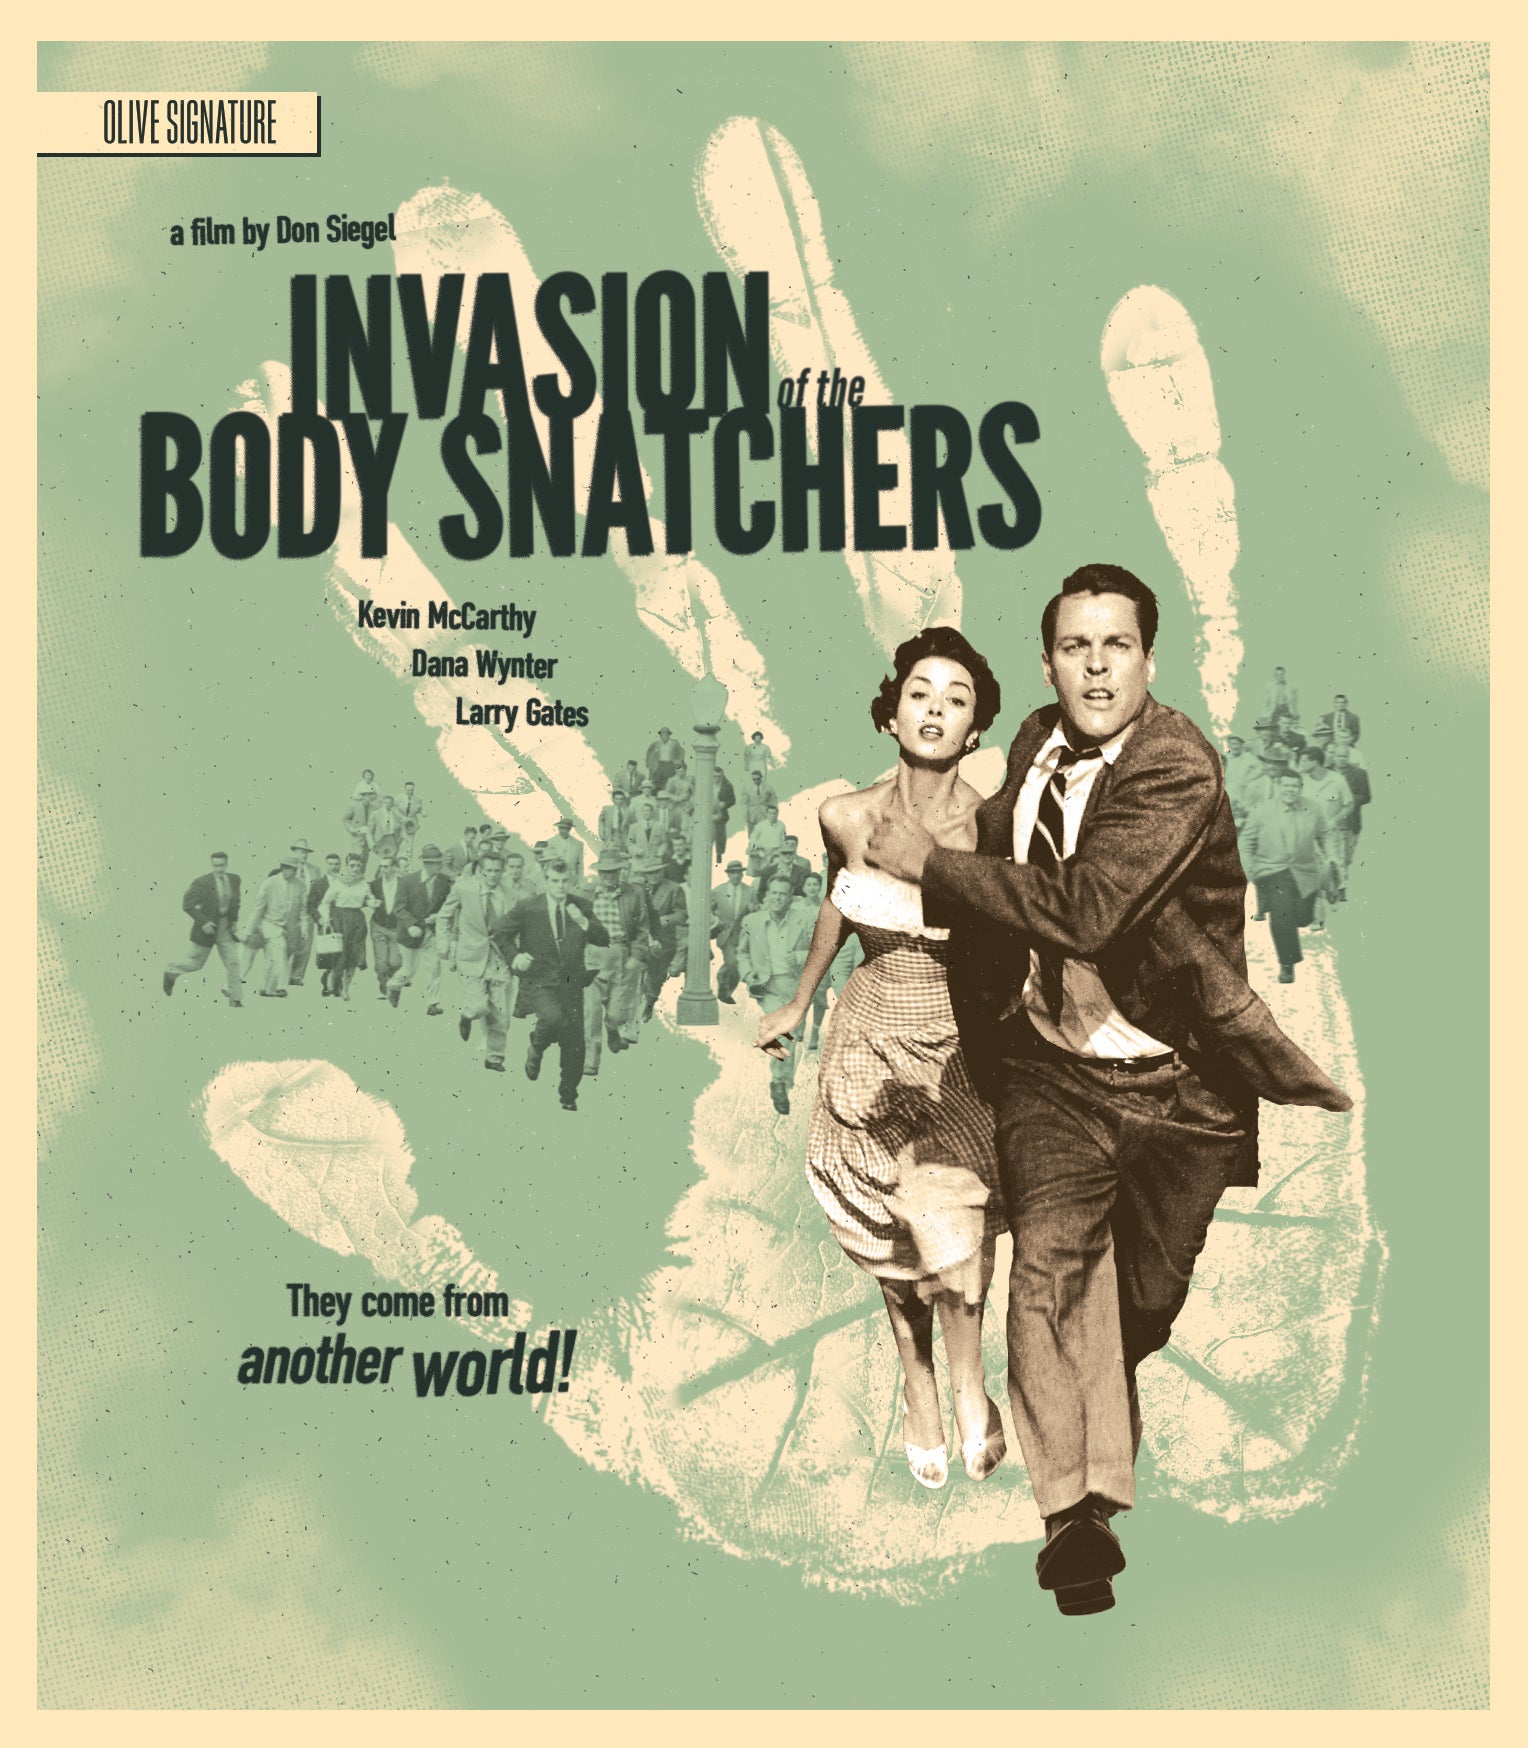 INVASION OF THE BODY SNATCHERS (OLIVE SIGNATURE COLLECTION) BLU-RAY